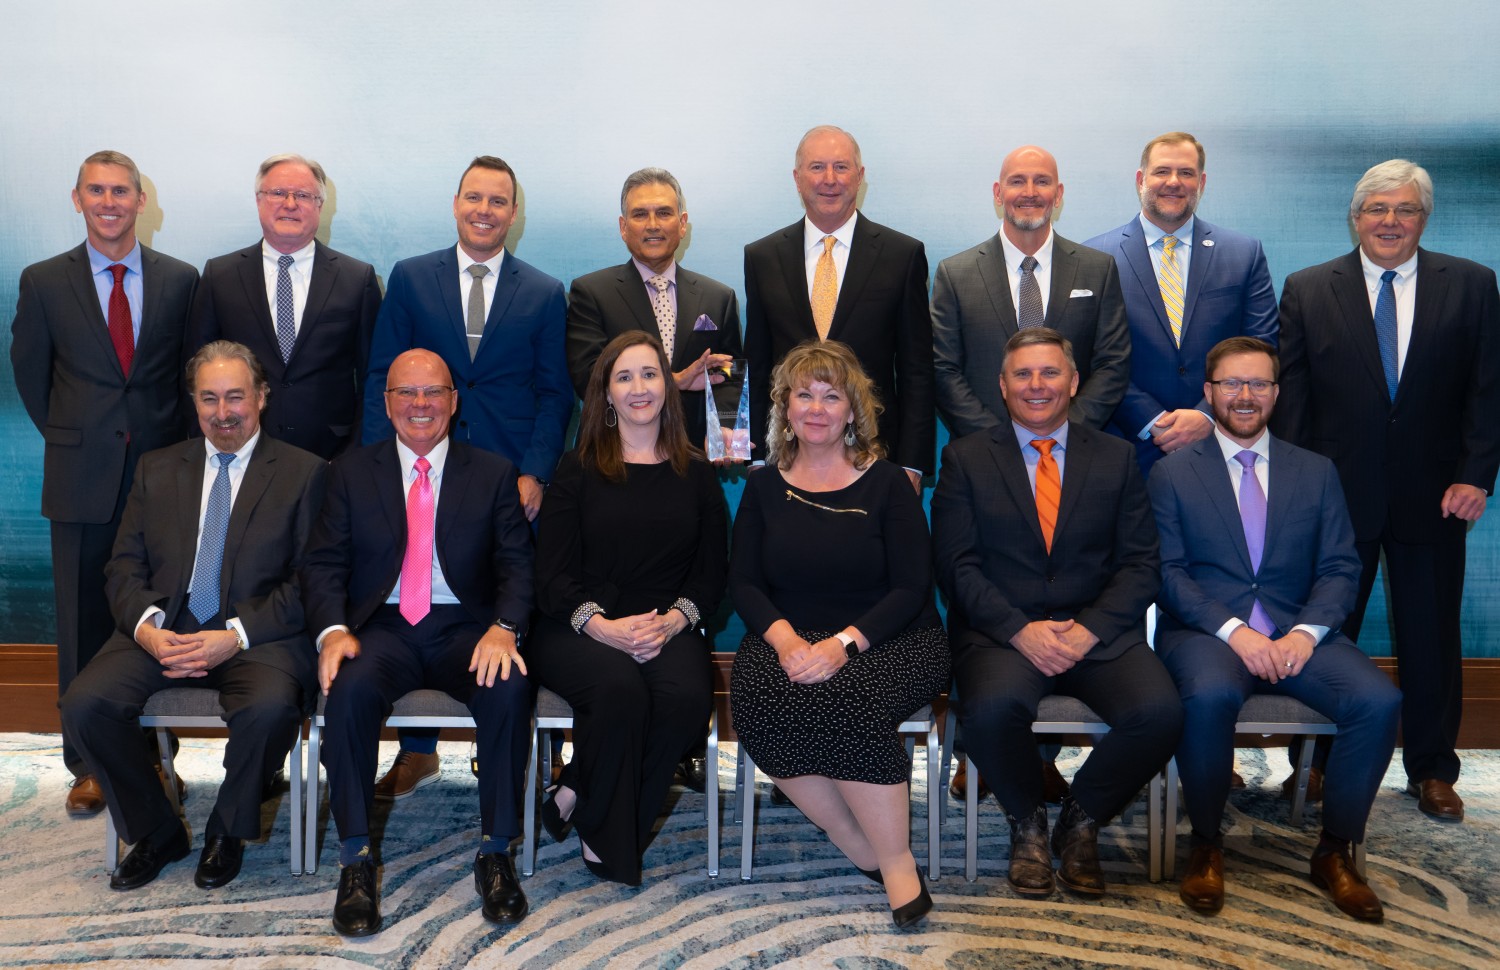 Caption: Toyota Material Handling (TMH) recognizes 15 of the company’s top dealers with the prestigious President’s Award at their annual Dealer Meeting in Columbus, Ind., March 22, 2022. (Front Row Left to Right: Ken Townsend, Toyota Lift of South Texas; Ron McCluskey, Brodie Toyota-Lift; Anika Conger-Capelle, Conger Toyota-Lift; Joyce Schwob, JIT Toyota-Lift; David Bailey, Southern States Toyotalift; Kyle Hudson, Western Materials Handling & Equipment Ltd.; Back Row Left to Right: Chris Frazee, ProLift Toyota Material Handling; Larry McKevitt, Summit ToyotaLift; Mark Andres, Toyota Material Handling Northern California; Shankar Basu, Toyota Material Handling Solutions; Jim Shoppa, Shoppa’s Material Handling, Ltd.; Jeff Burns, Kenco Toyota-Lift; Michael Turnmyre, VESCO Toyotalift; Scott Plummer, W.D. Matthews Machinery Co.; not Pictured: Brent Bahrns, Bahrns ToyotaLift.